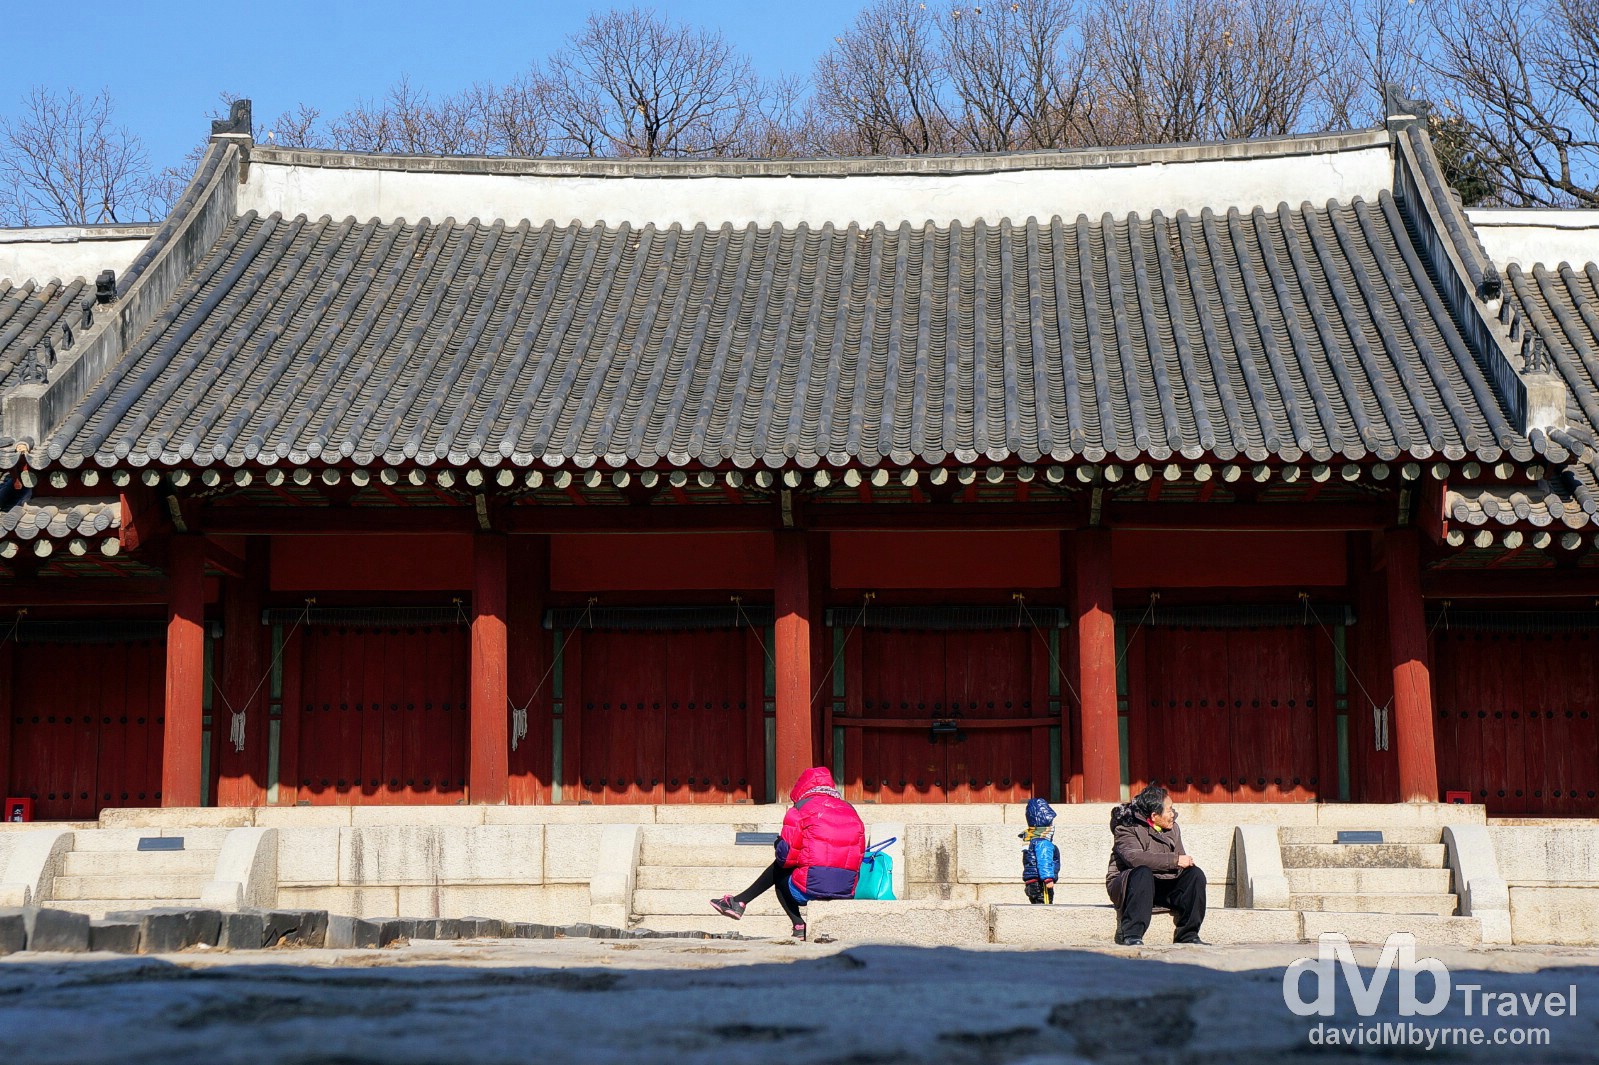 In the grounds of Yeongnyeongjeon in the UNESCO listed Jongmyo Shrine in Seoul, South Korea. January 18th, 2014.